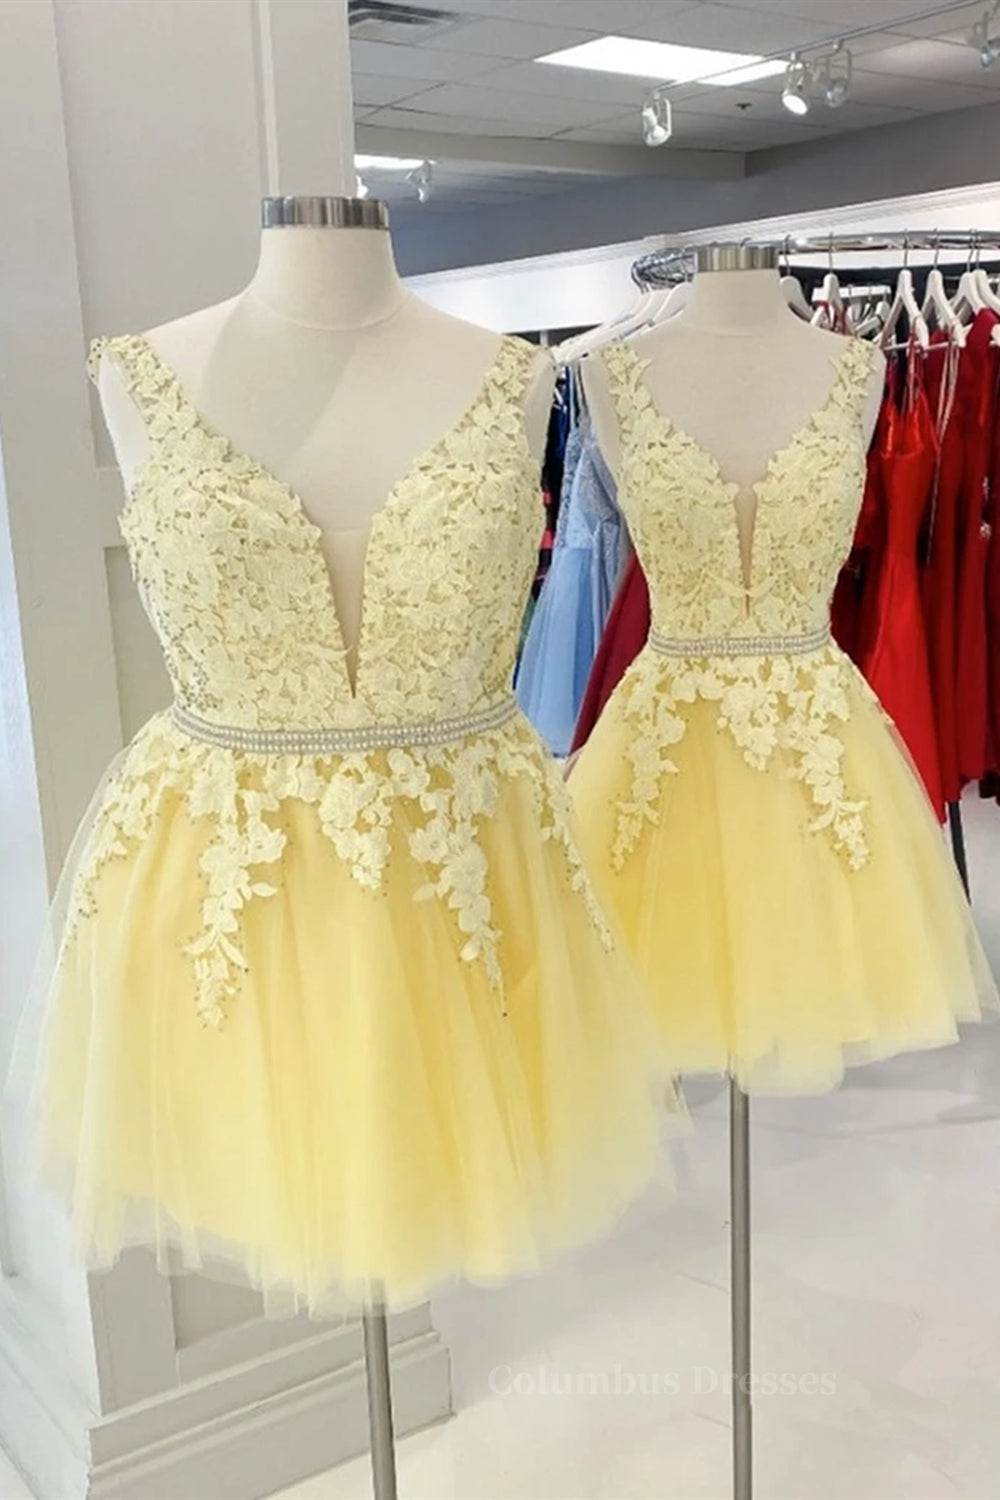 Party Dress Dress, Cute V Neck Yellow Lace Short Prom Dress with Belt, Yellow Lace Homecoming Dress, Short Yellow Formal Evening Dress